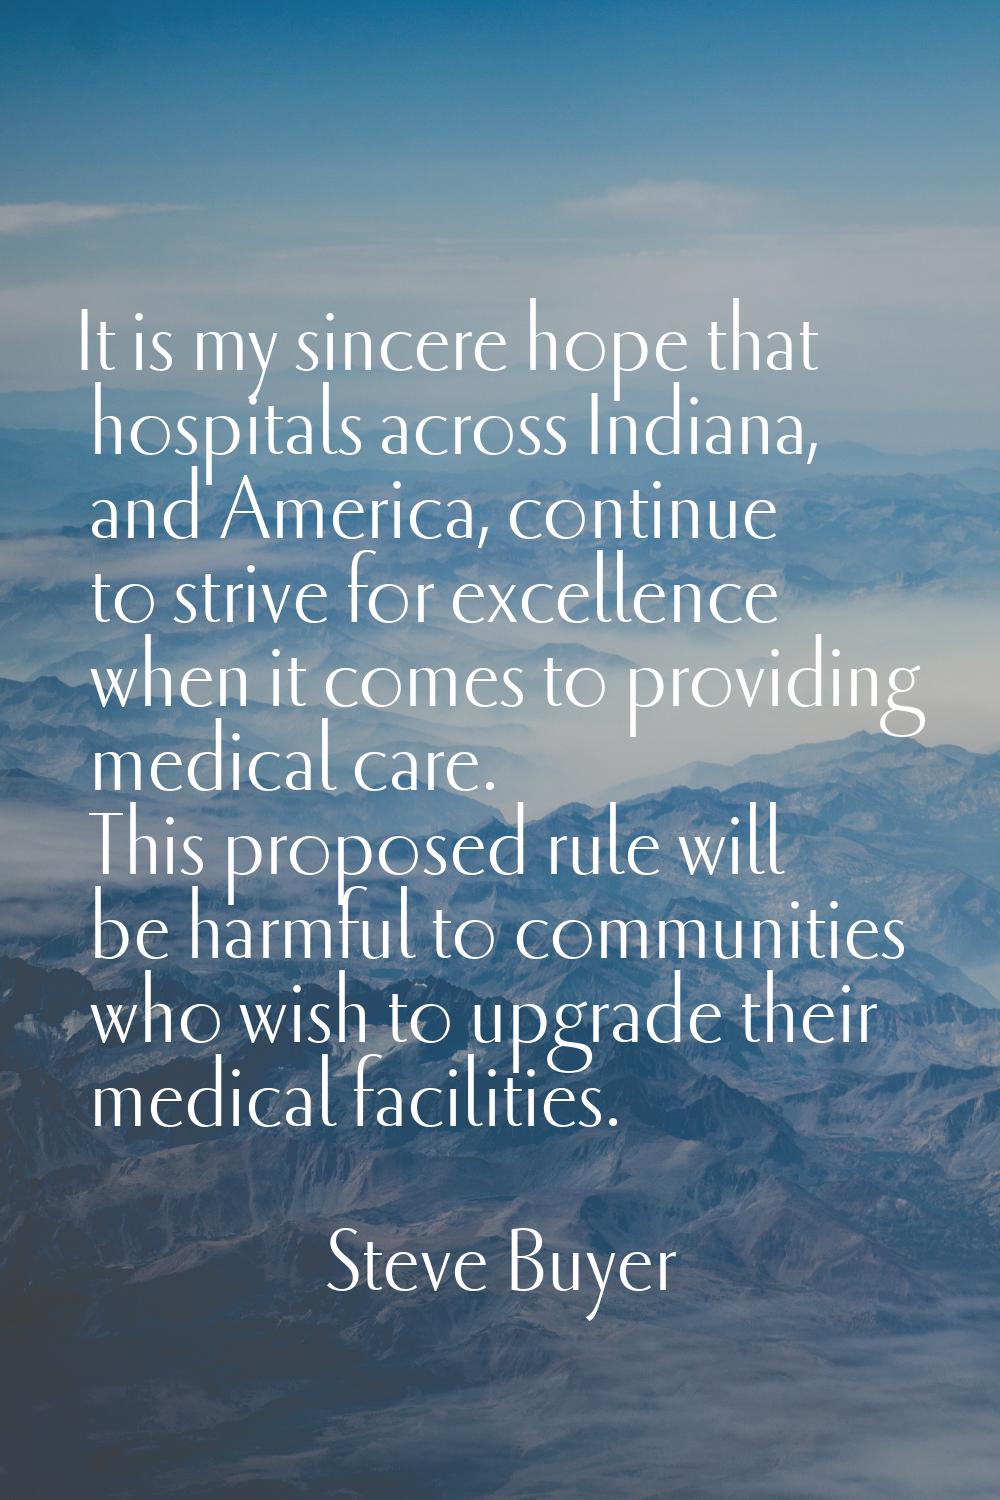 It is my sincere hope that hospitals across Indiana, and America, continue to strive for excellence